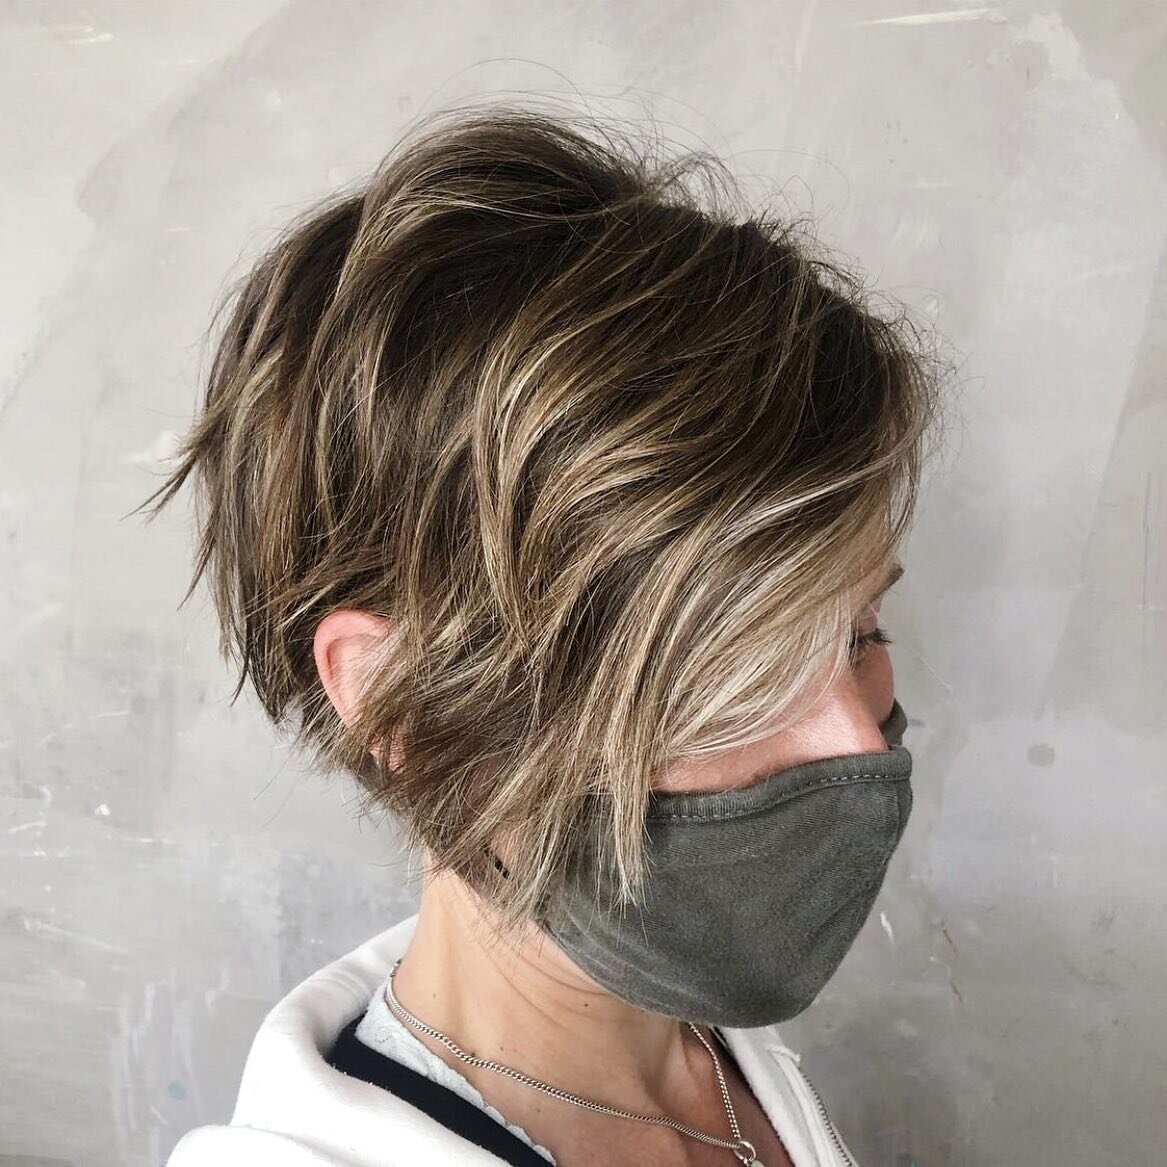 Pixies and bobs can be lived in too 😋 @leslie_colour did this great beachy color while helping her client transition through growing out her pixie cut 🌊